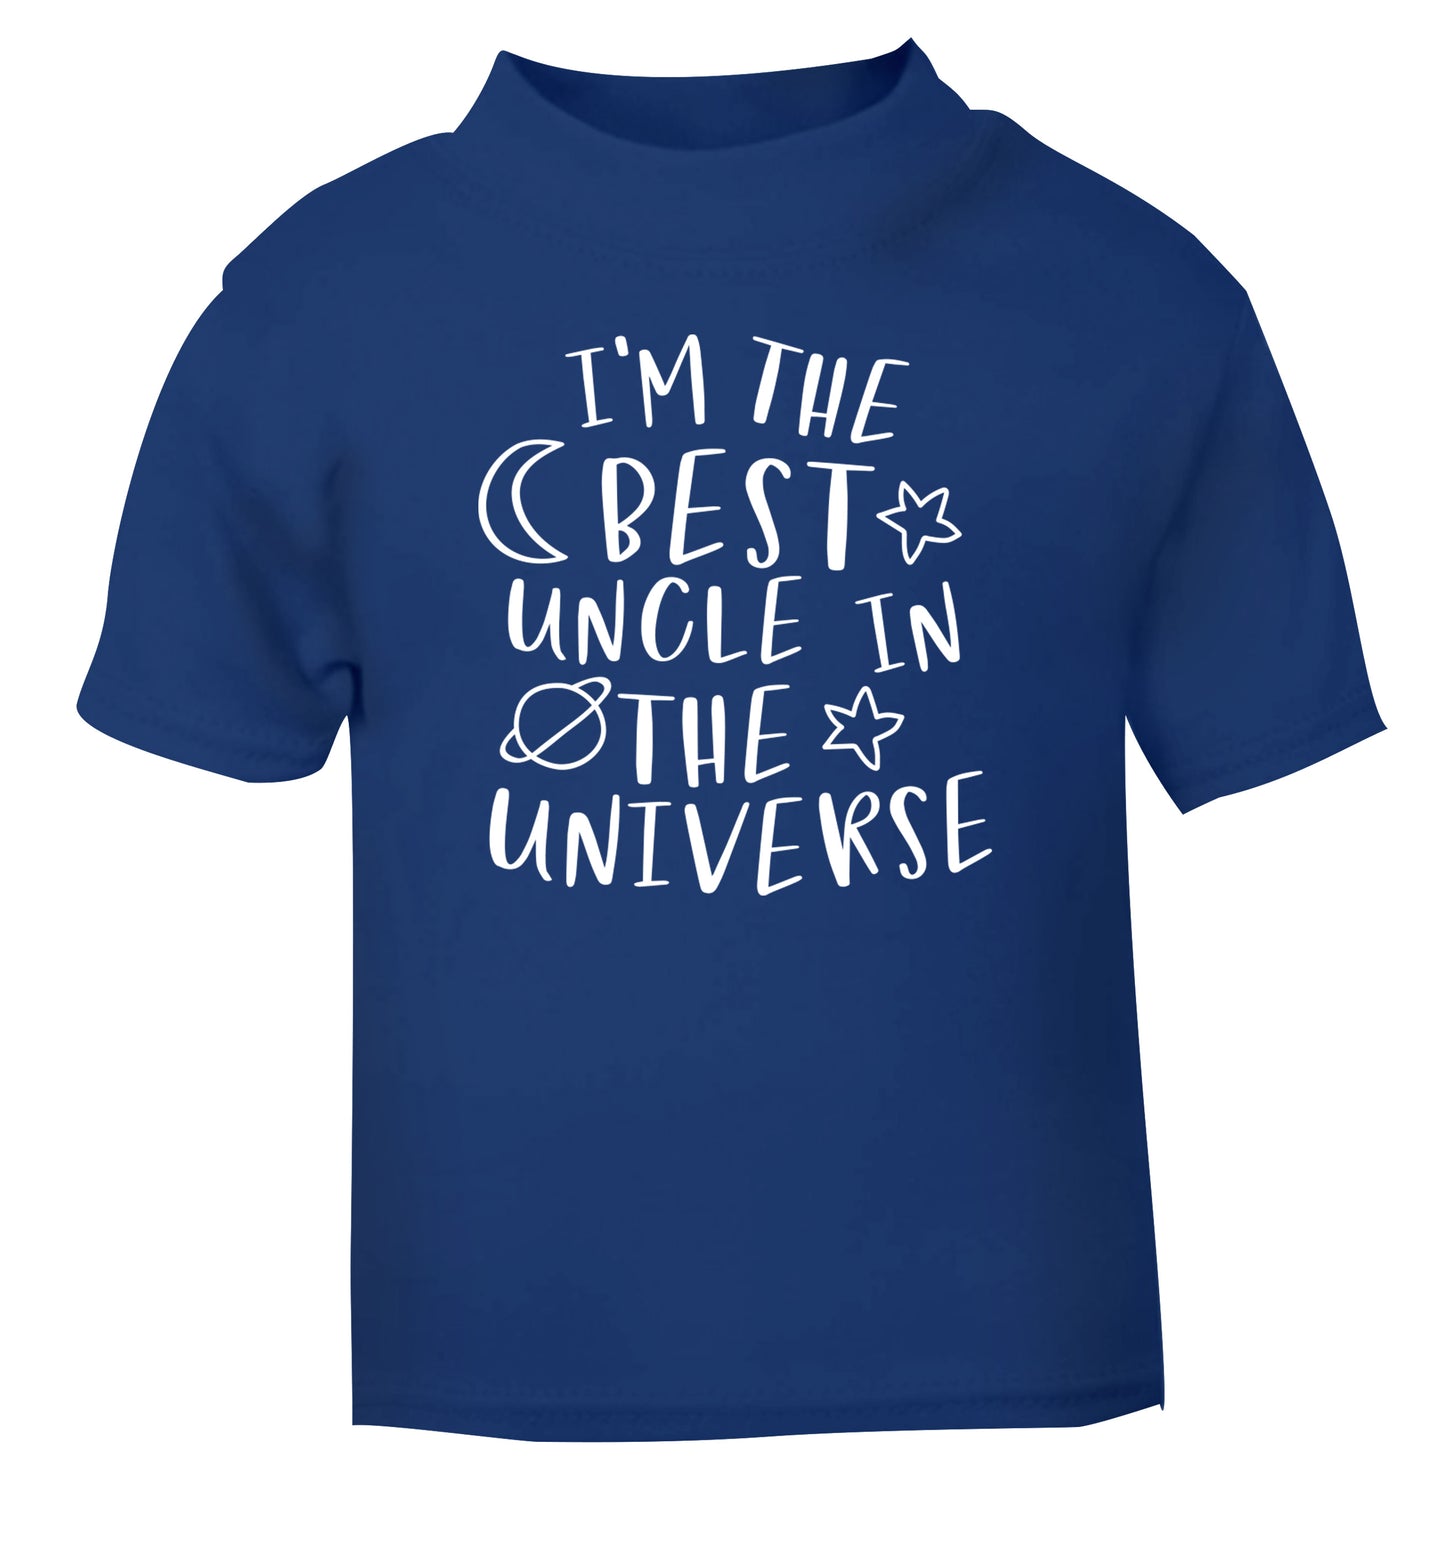 I'm the best uncle in the universe blue Baby Toddler Tshirt 2 Years